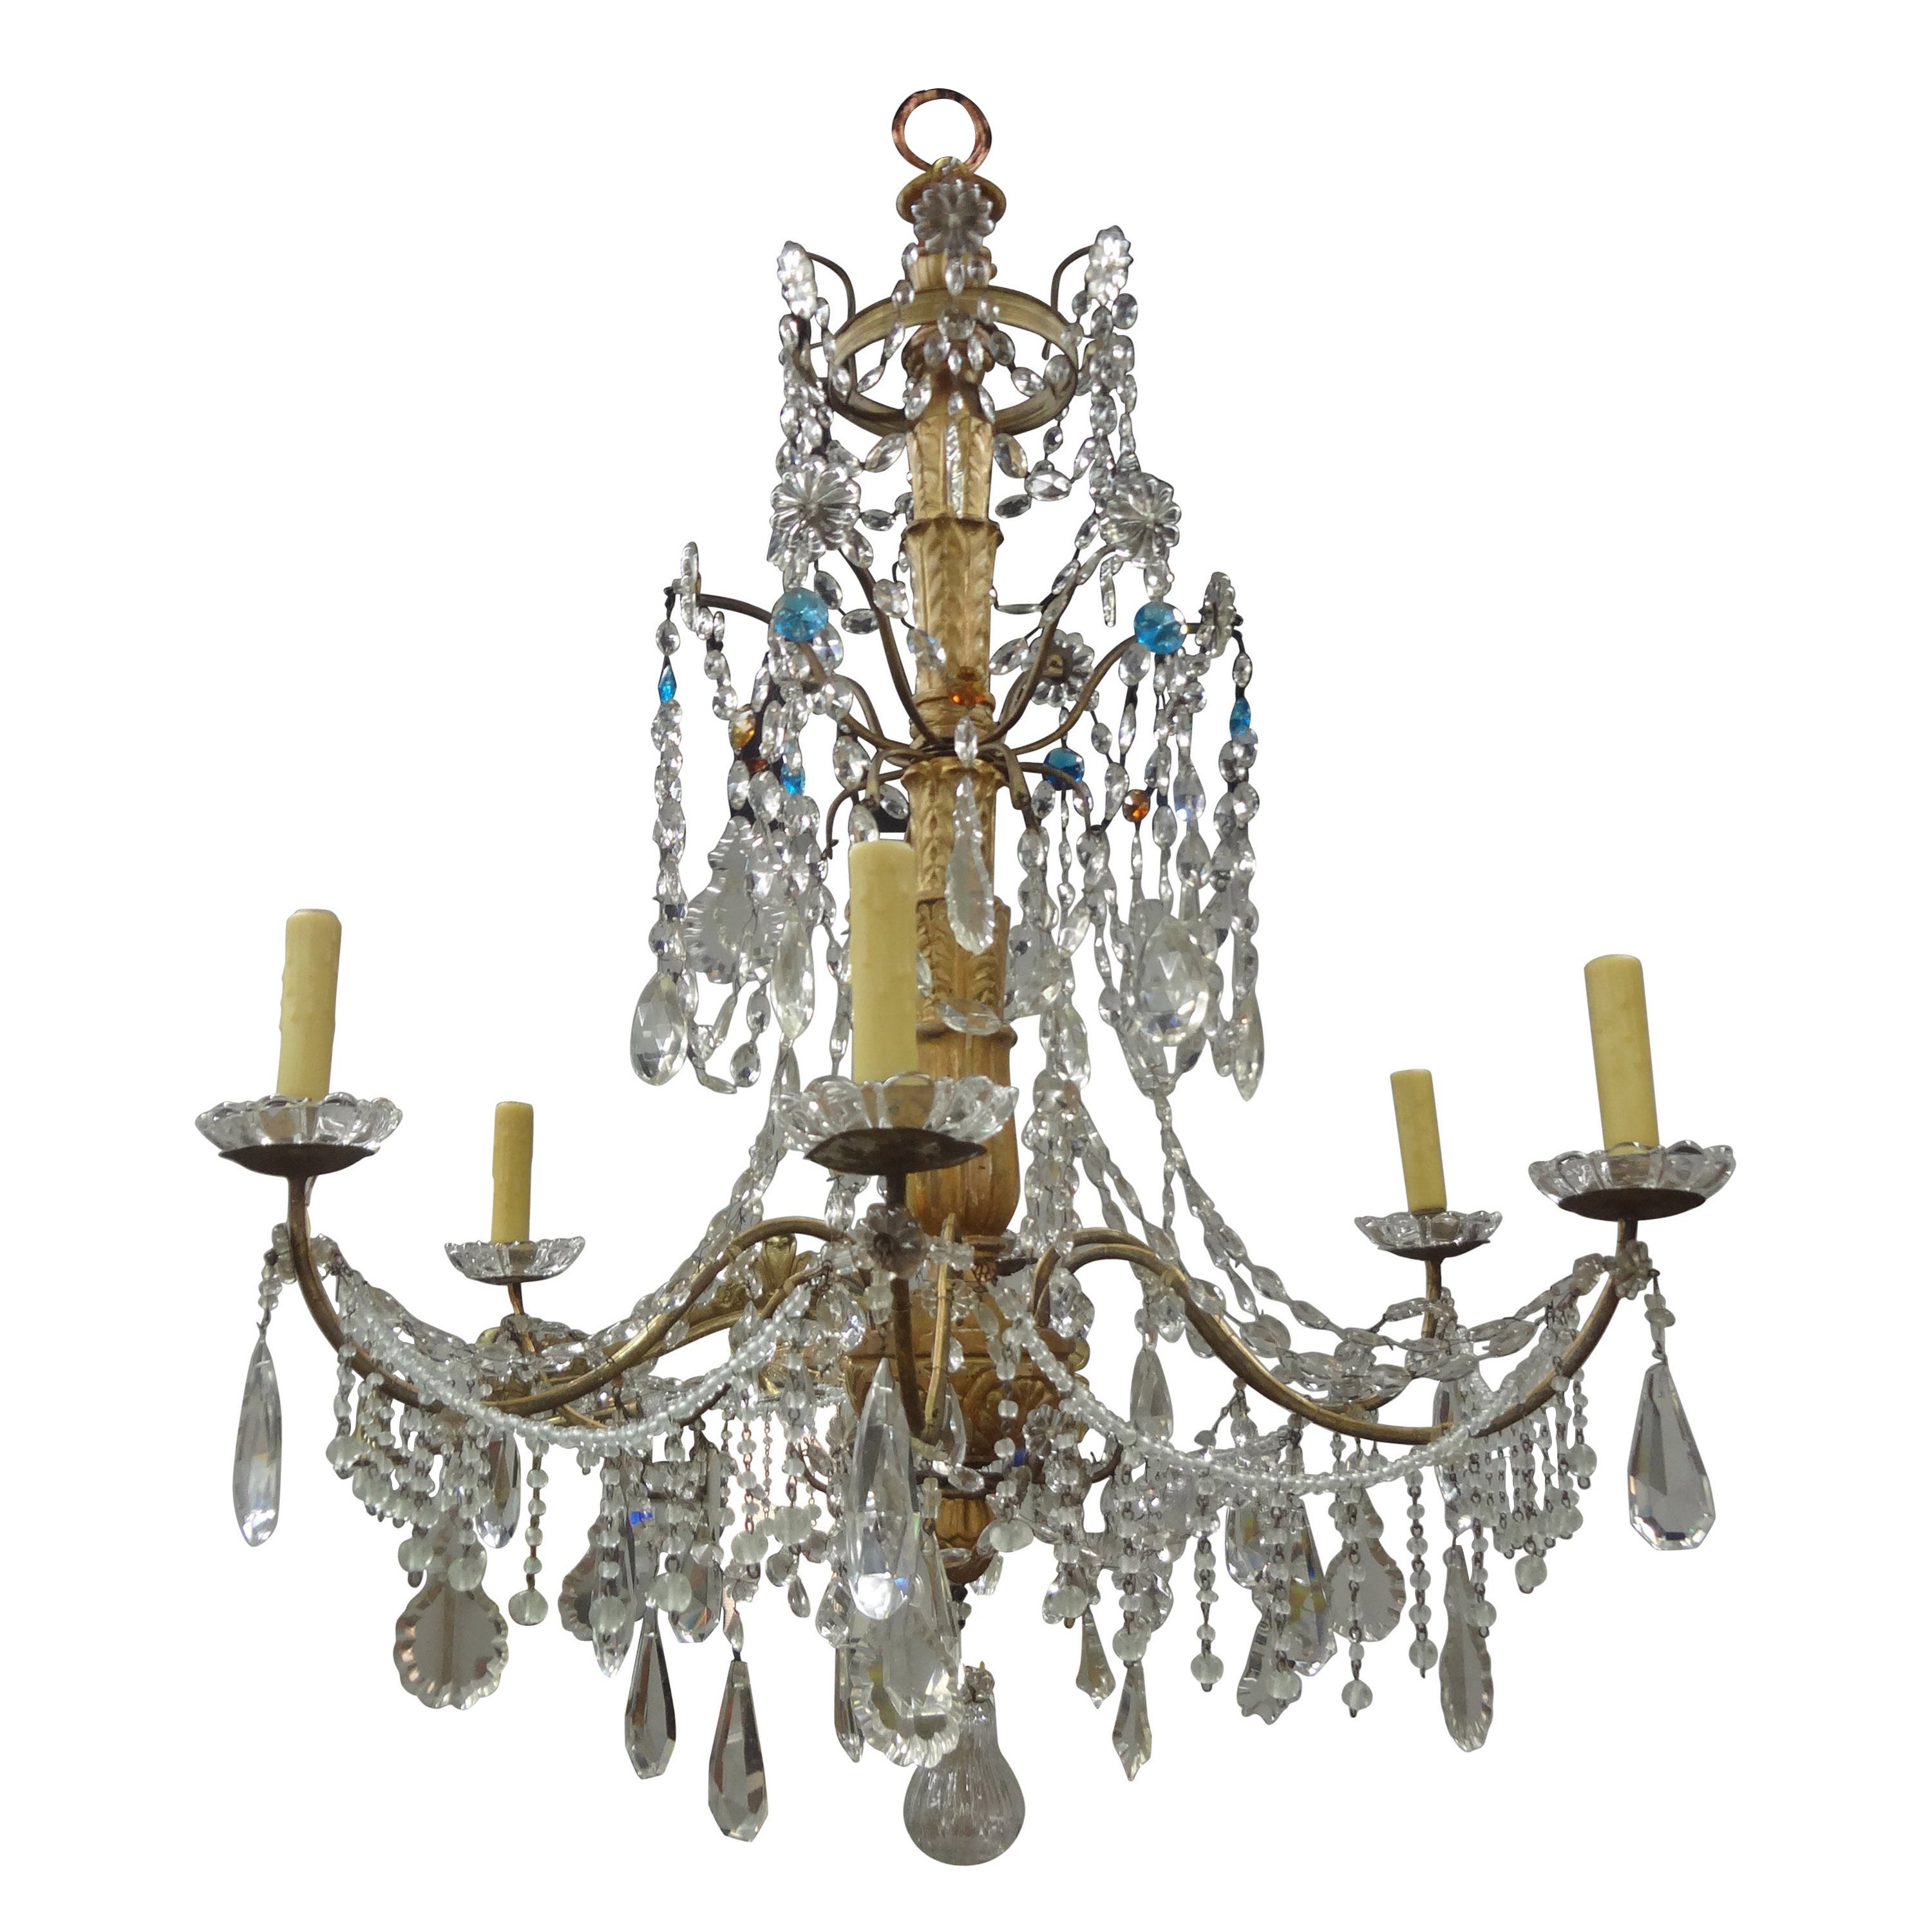 Large 19th Century Italian Genovese Giltwood and Crystal Chandelier